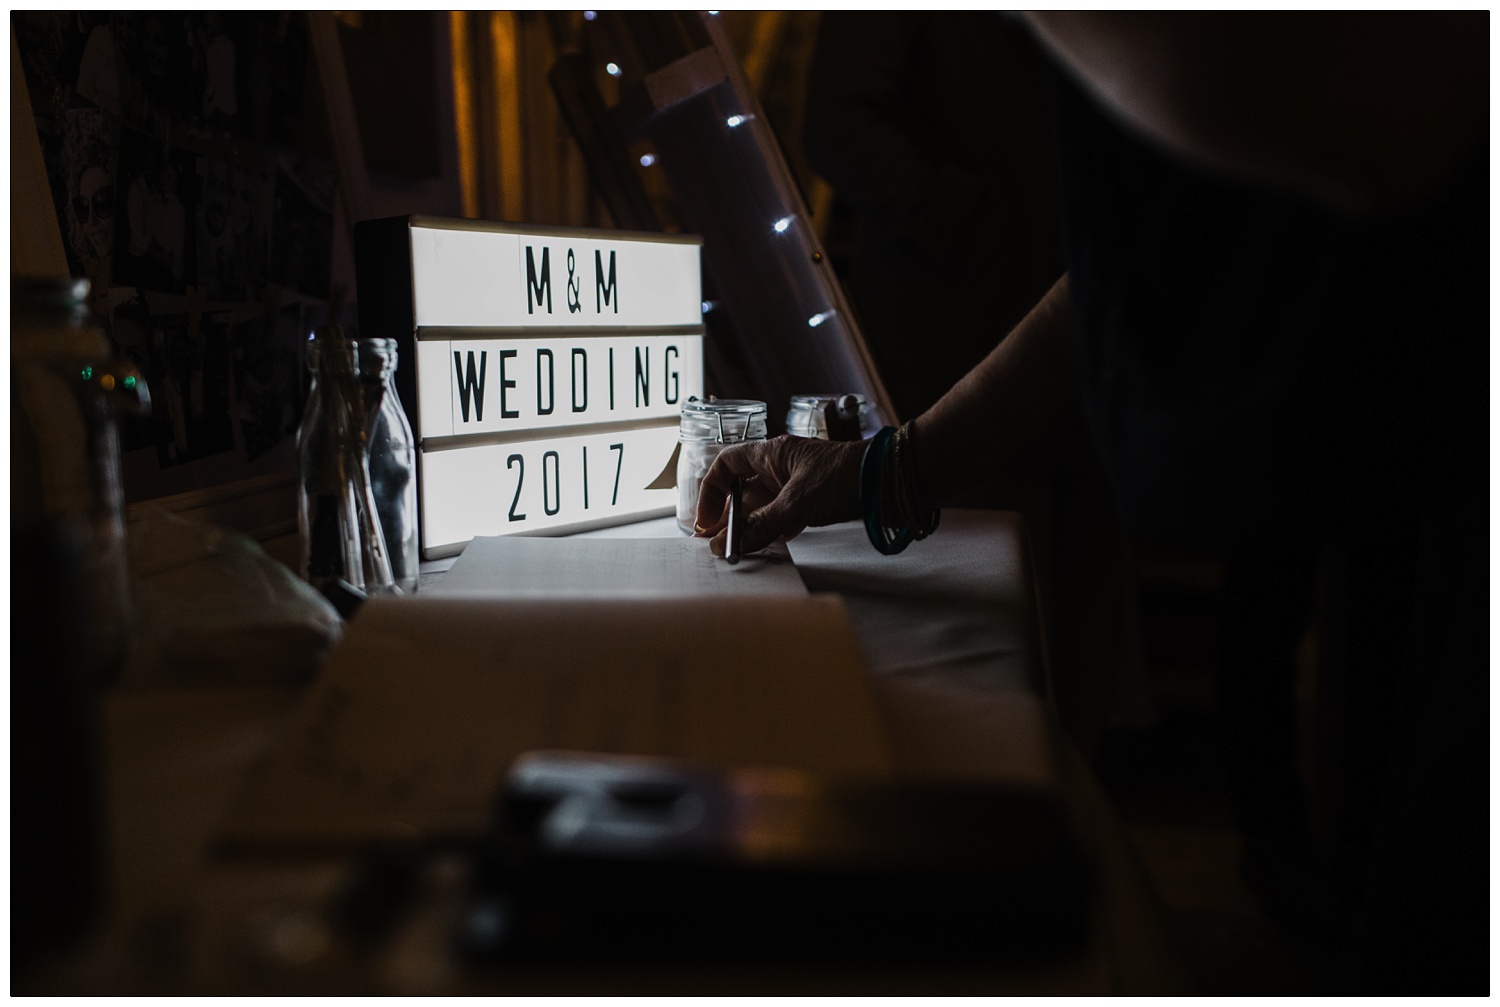 A cinema light box that says "M&M Wedding 2017". Someone is signing the guestbook in front of the light.